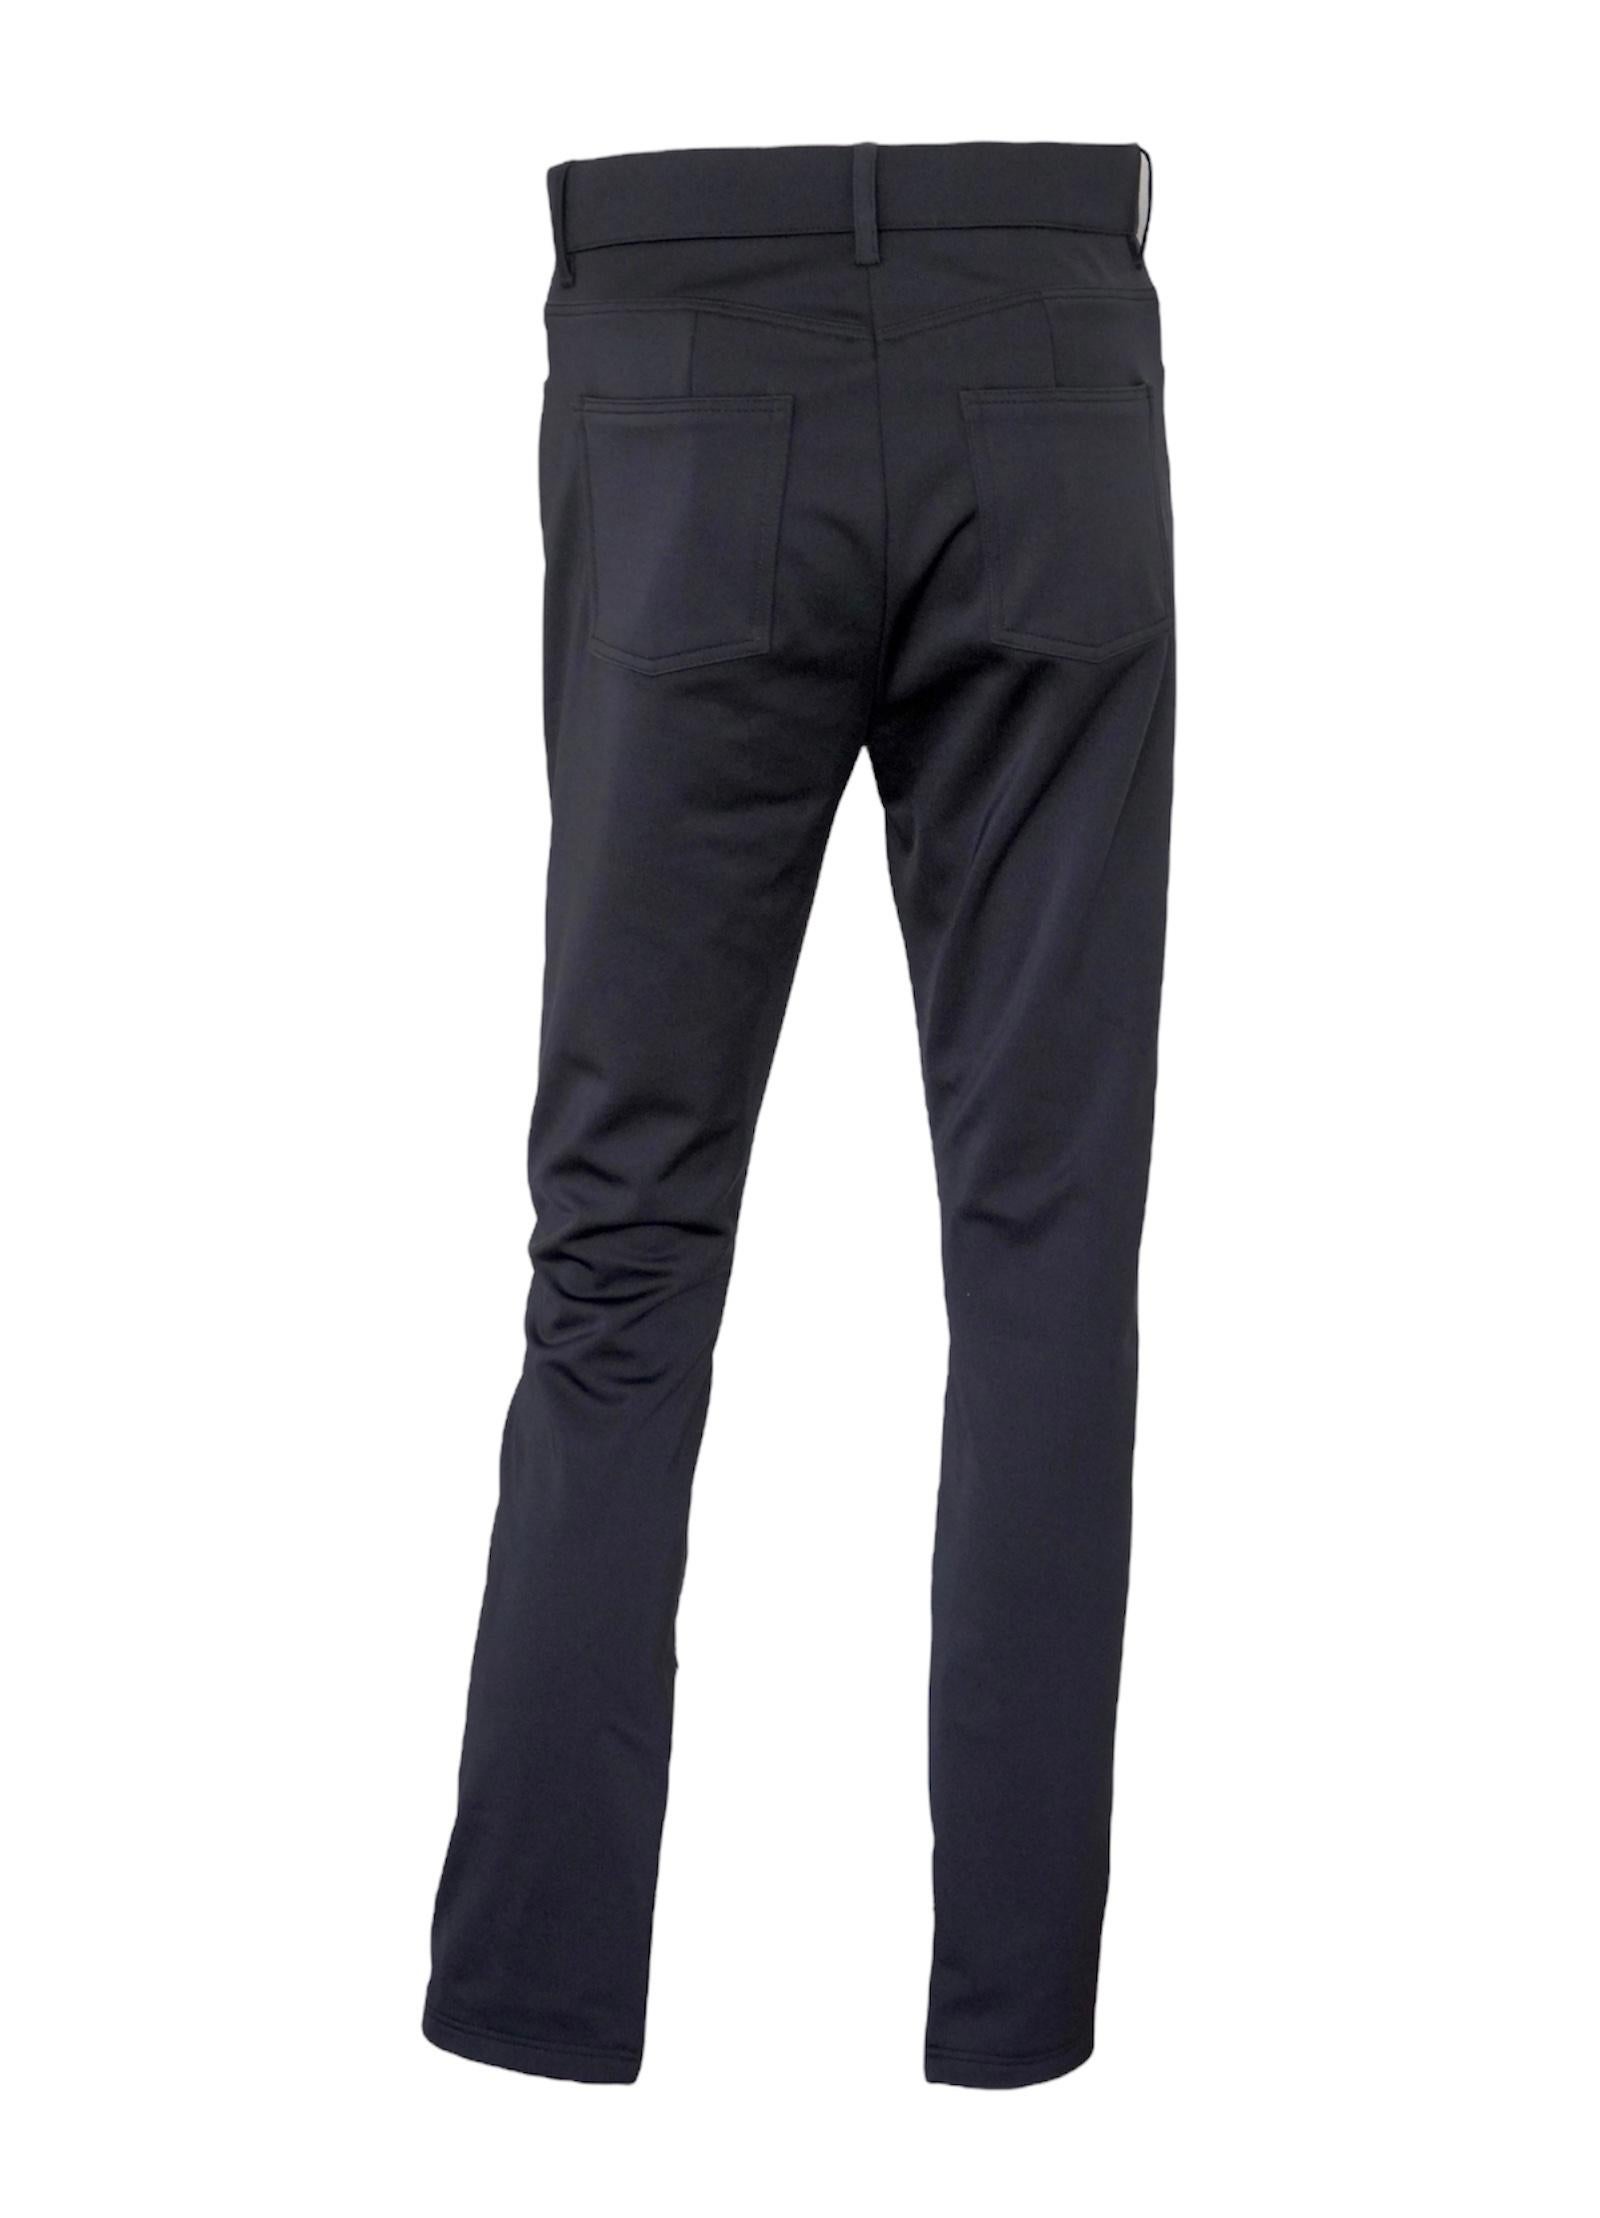 Balenciaga Ankle Zip Black Pant sz 40 In New Condition For Sale In Beverly Hills, CA